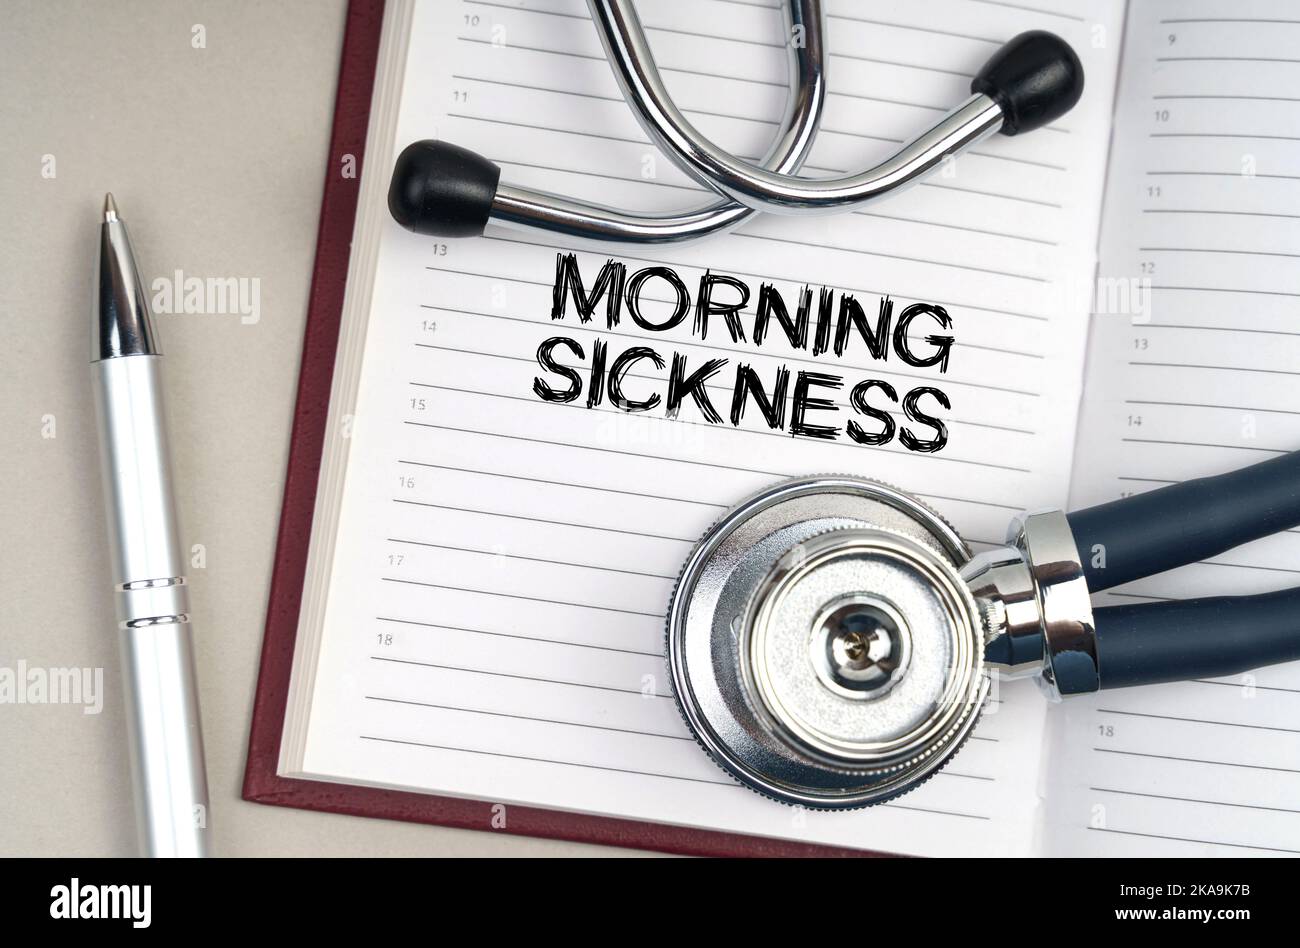 Medicine concept. On the table is a stethoscope, a pen and a notebook in which it is written - Morning Sickness Stock Photo